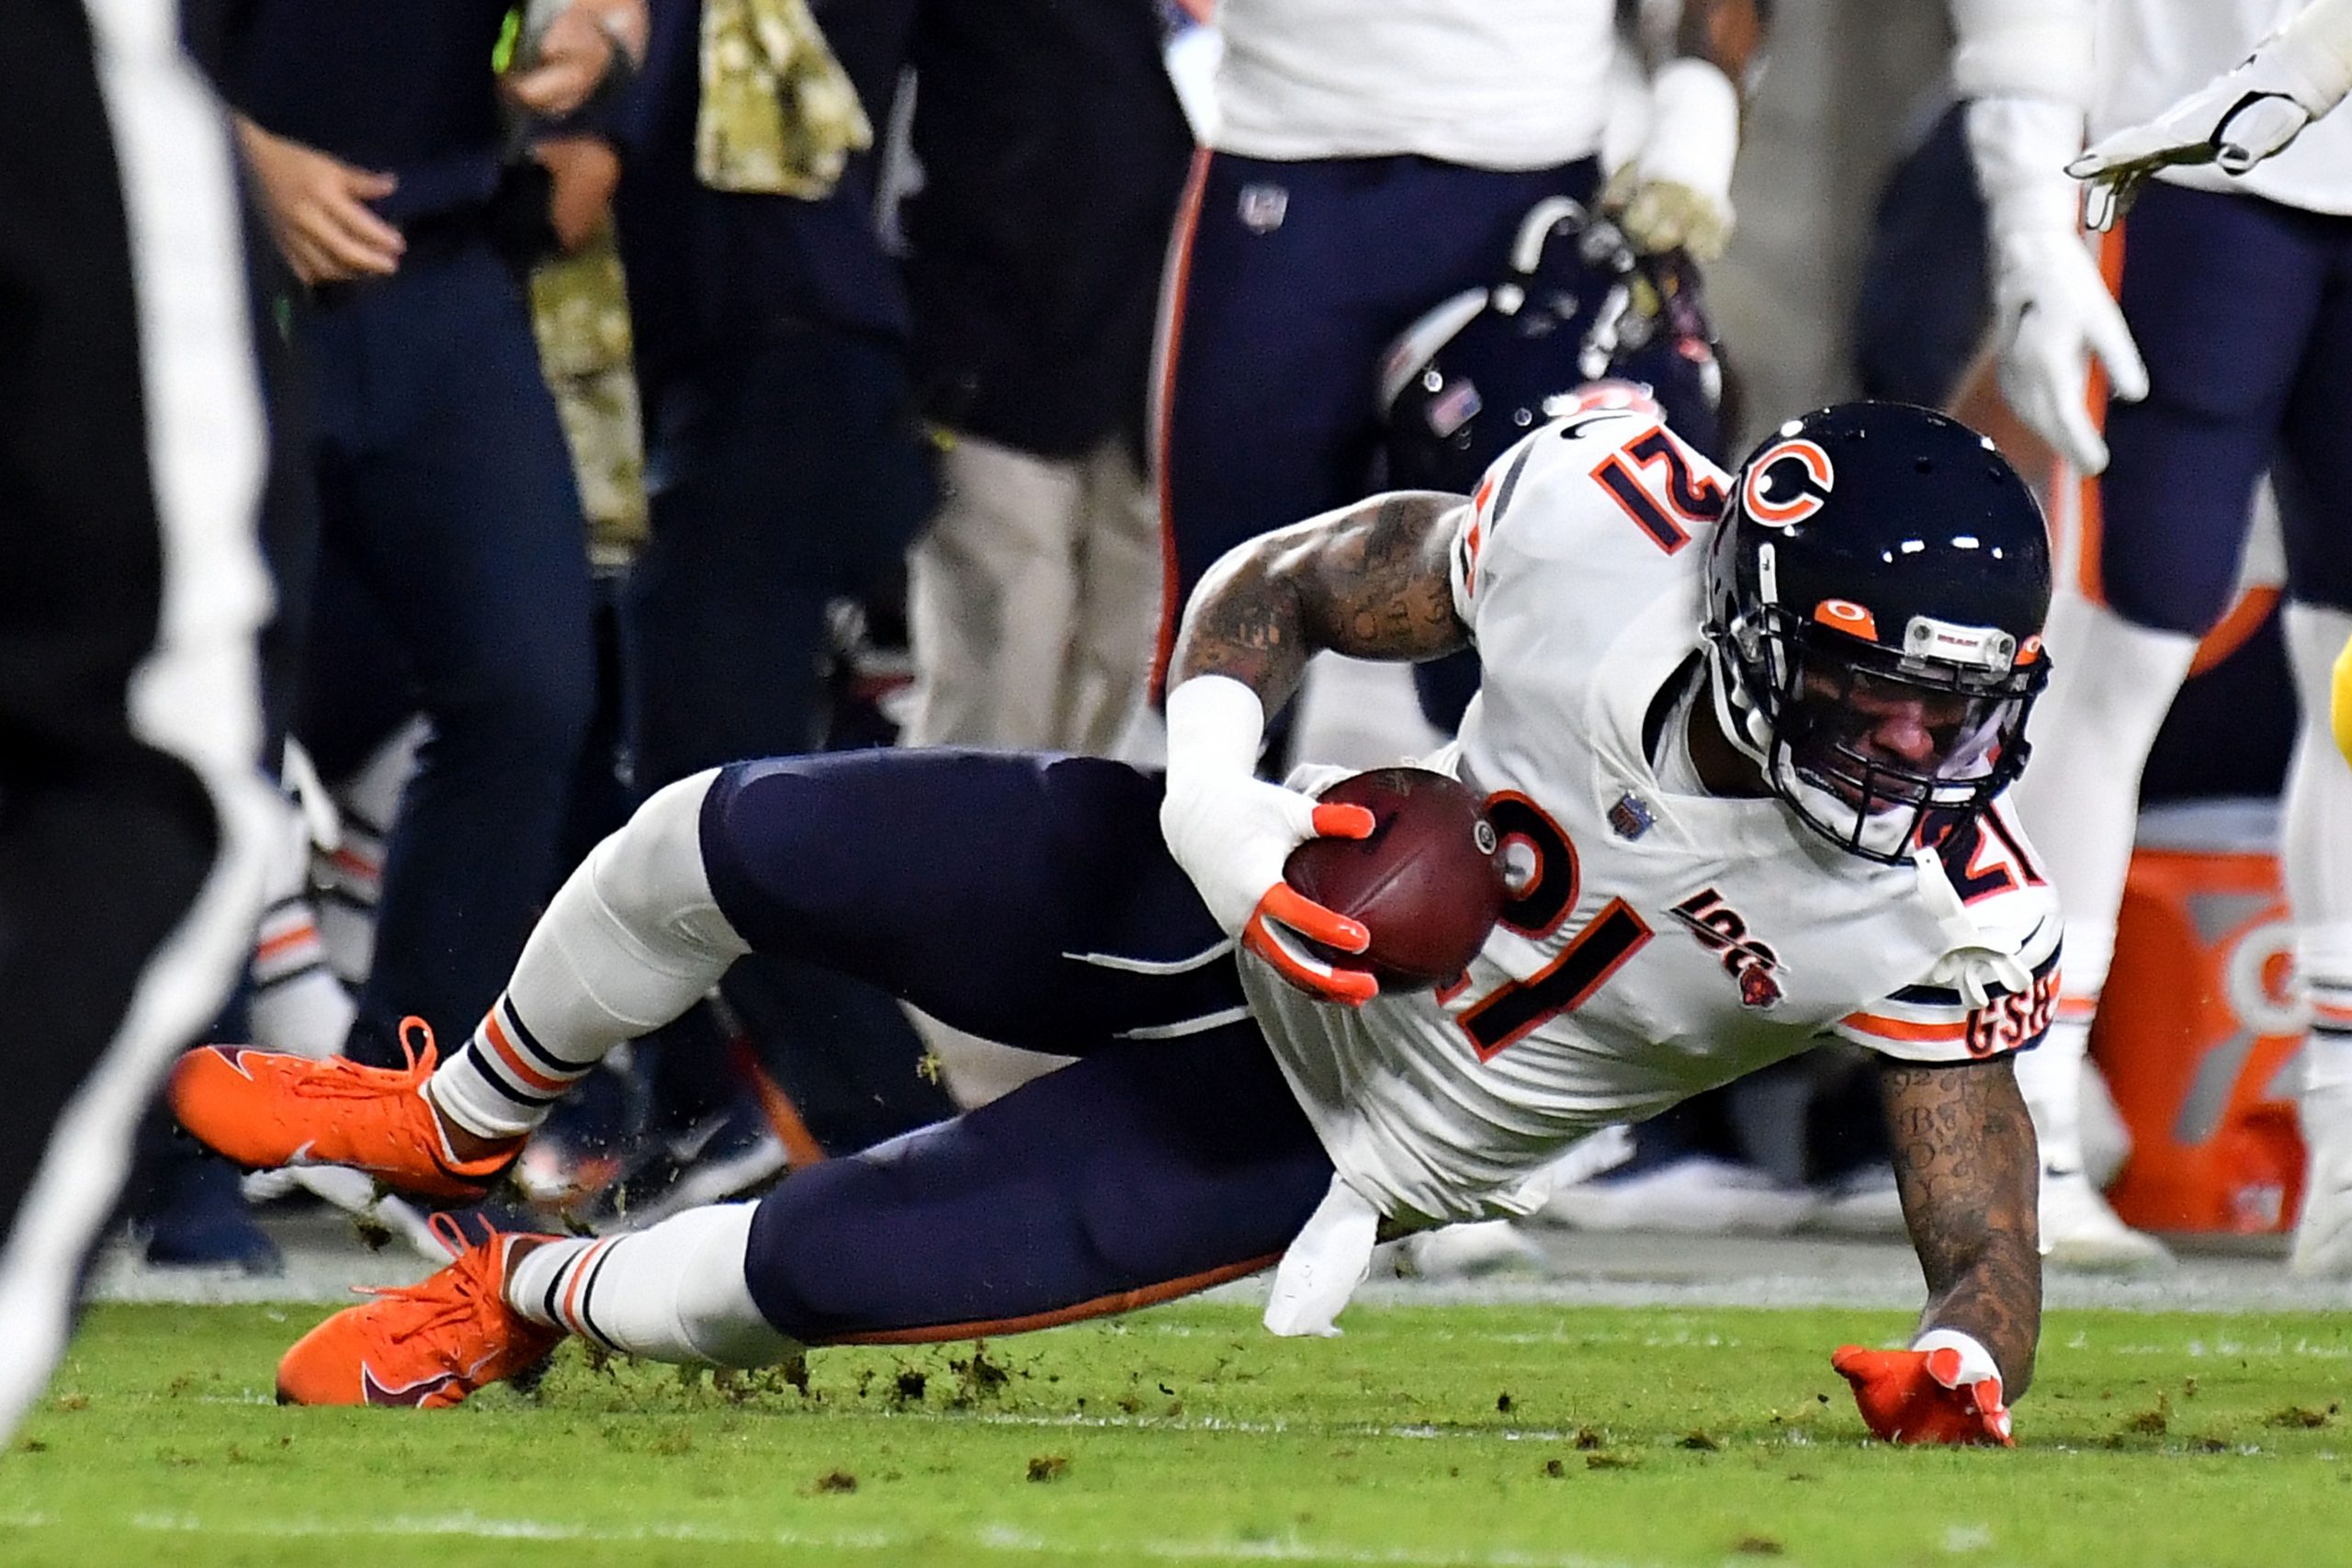 November 17, 2019 Los Angeles, CA.Chicago Bears strong safety Ha Ha Clinton-Dix 21 recovers the fumble from Los Angeles